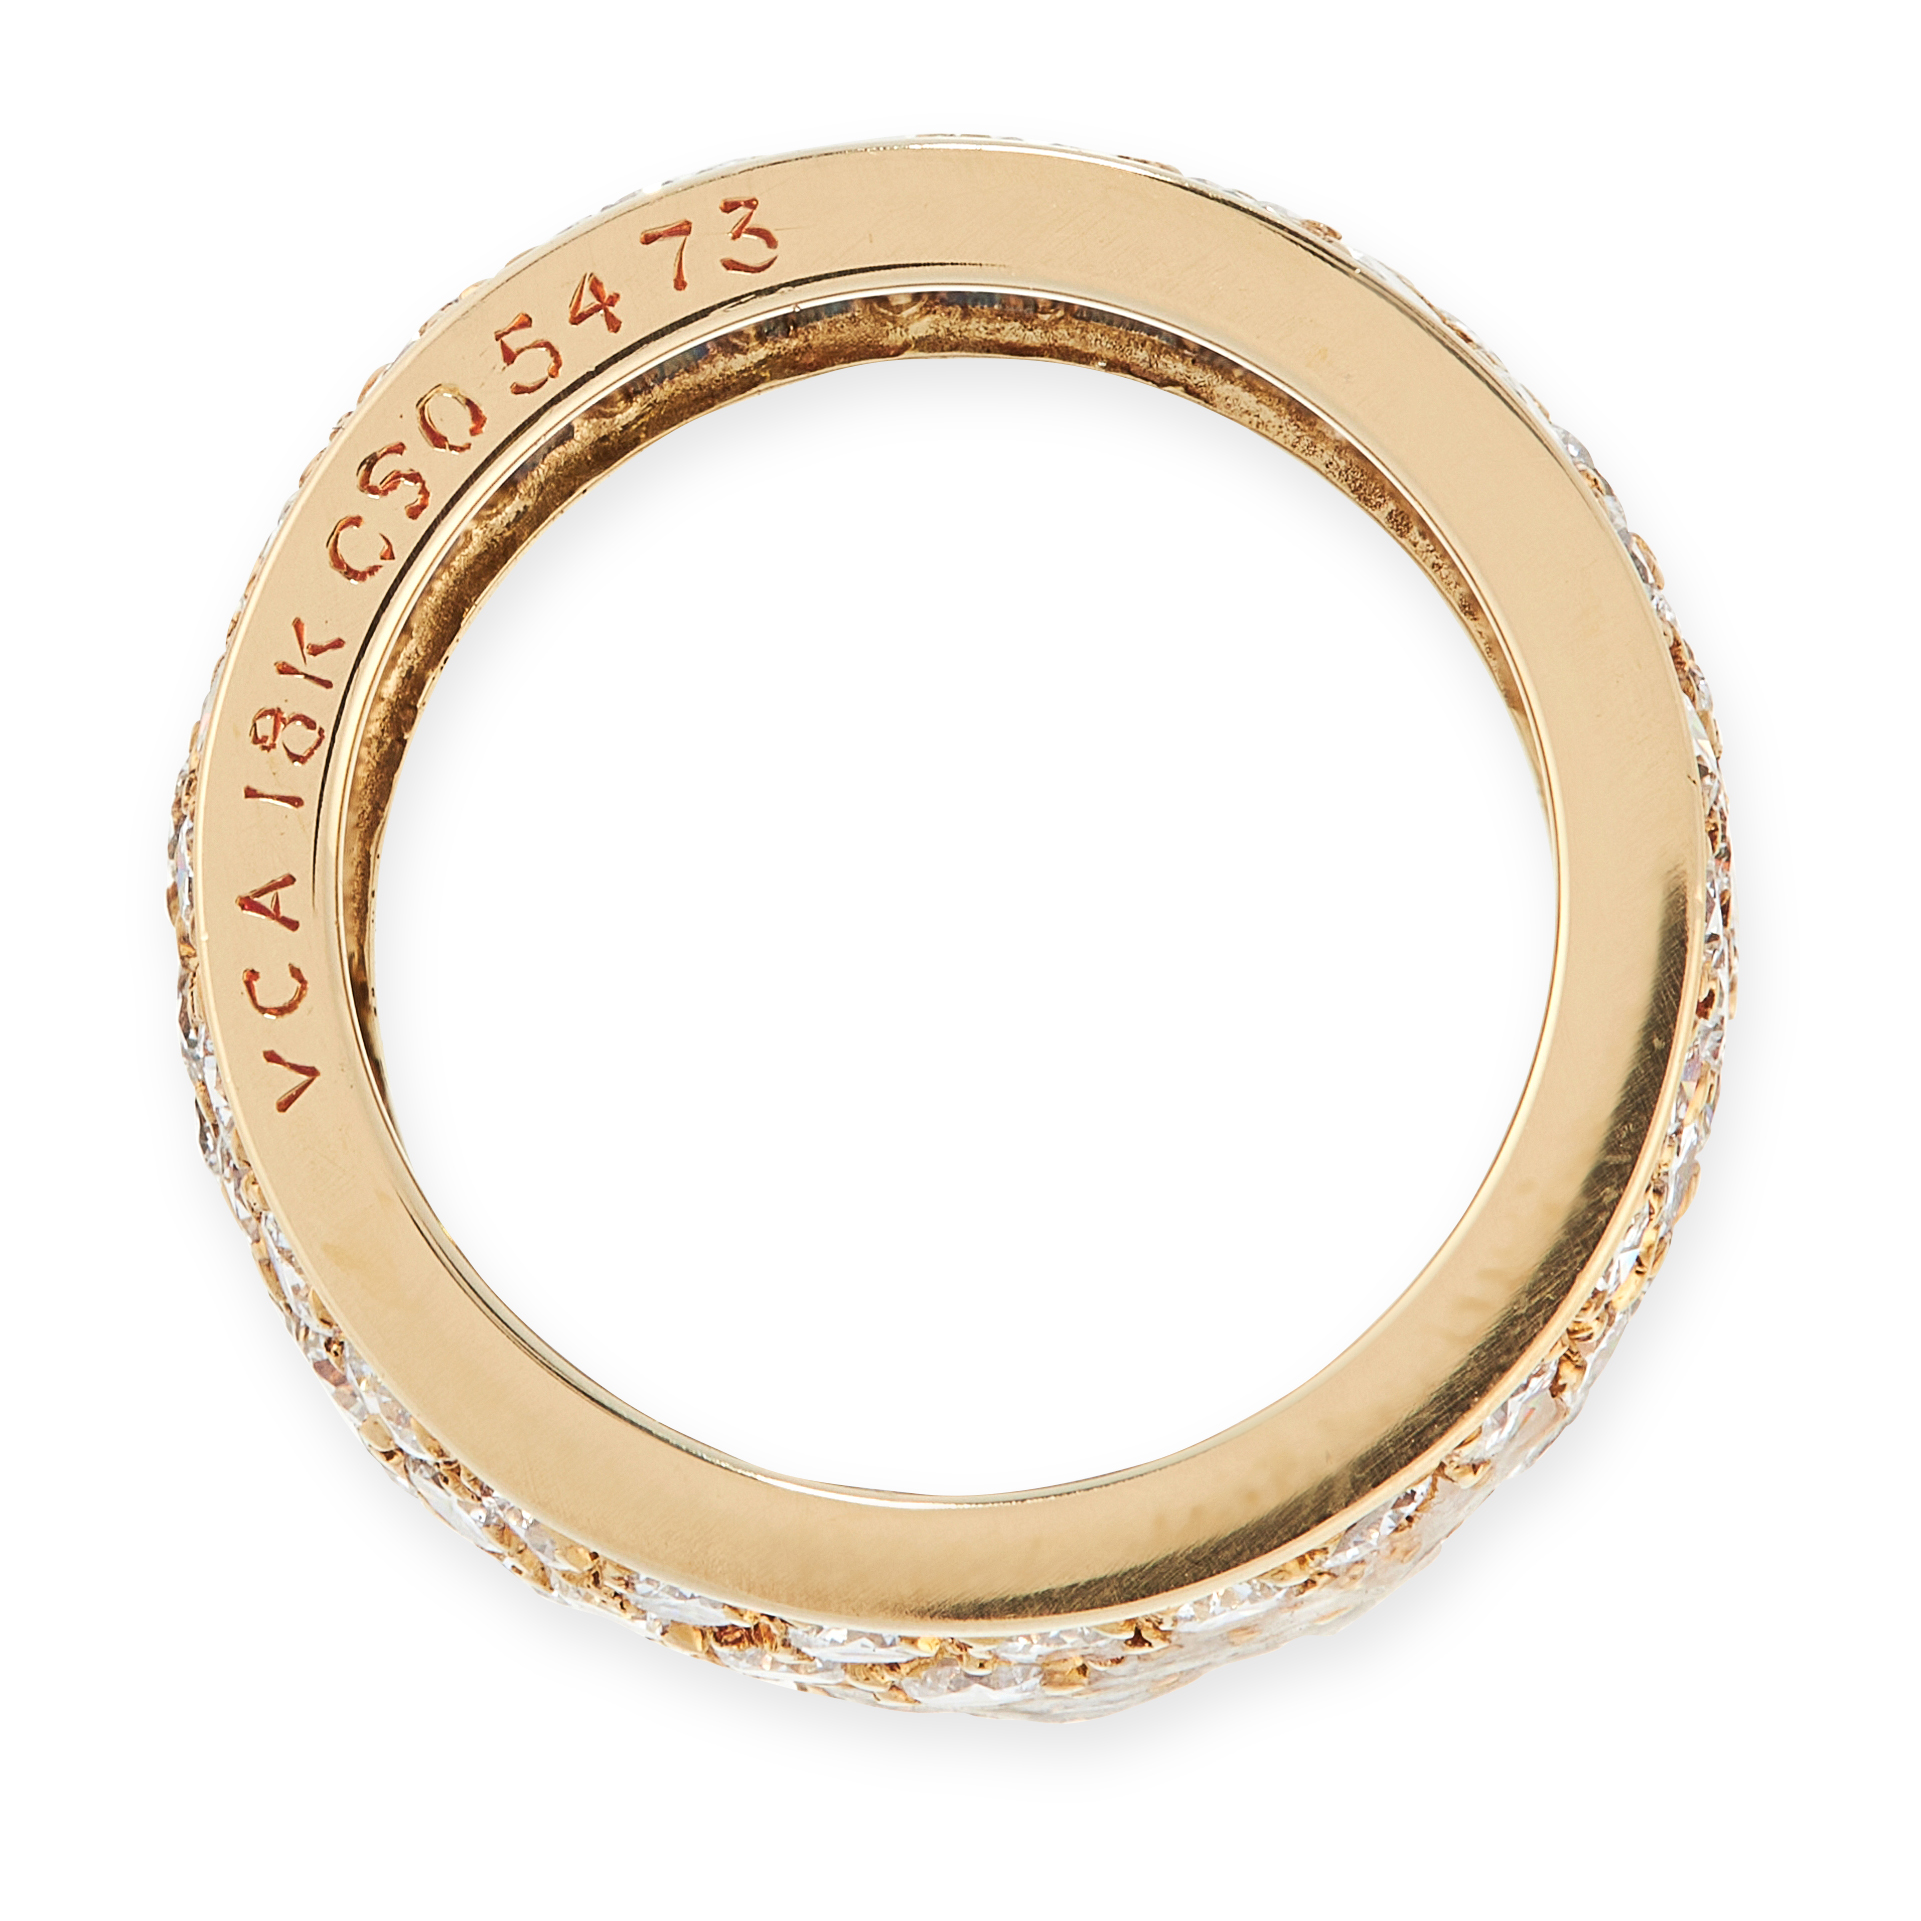 A VINTAGE DIAMOND ETERNITY RING, VAN CLEEF & ARPELS in 18ct yellow gold, the full band set with four - Image 2 of 2